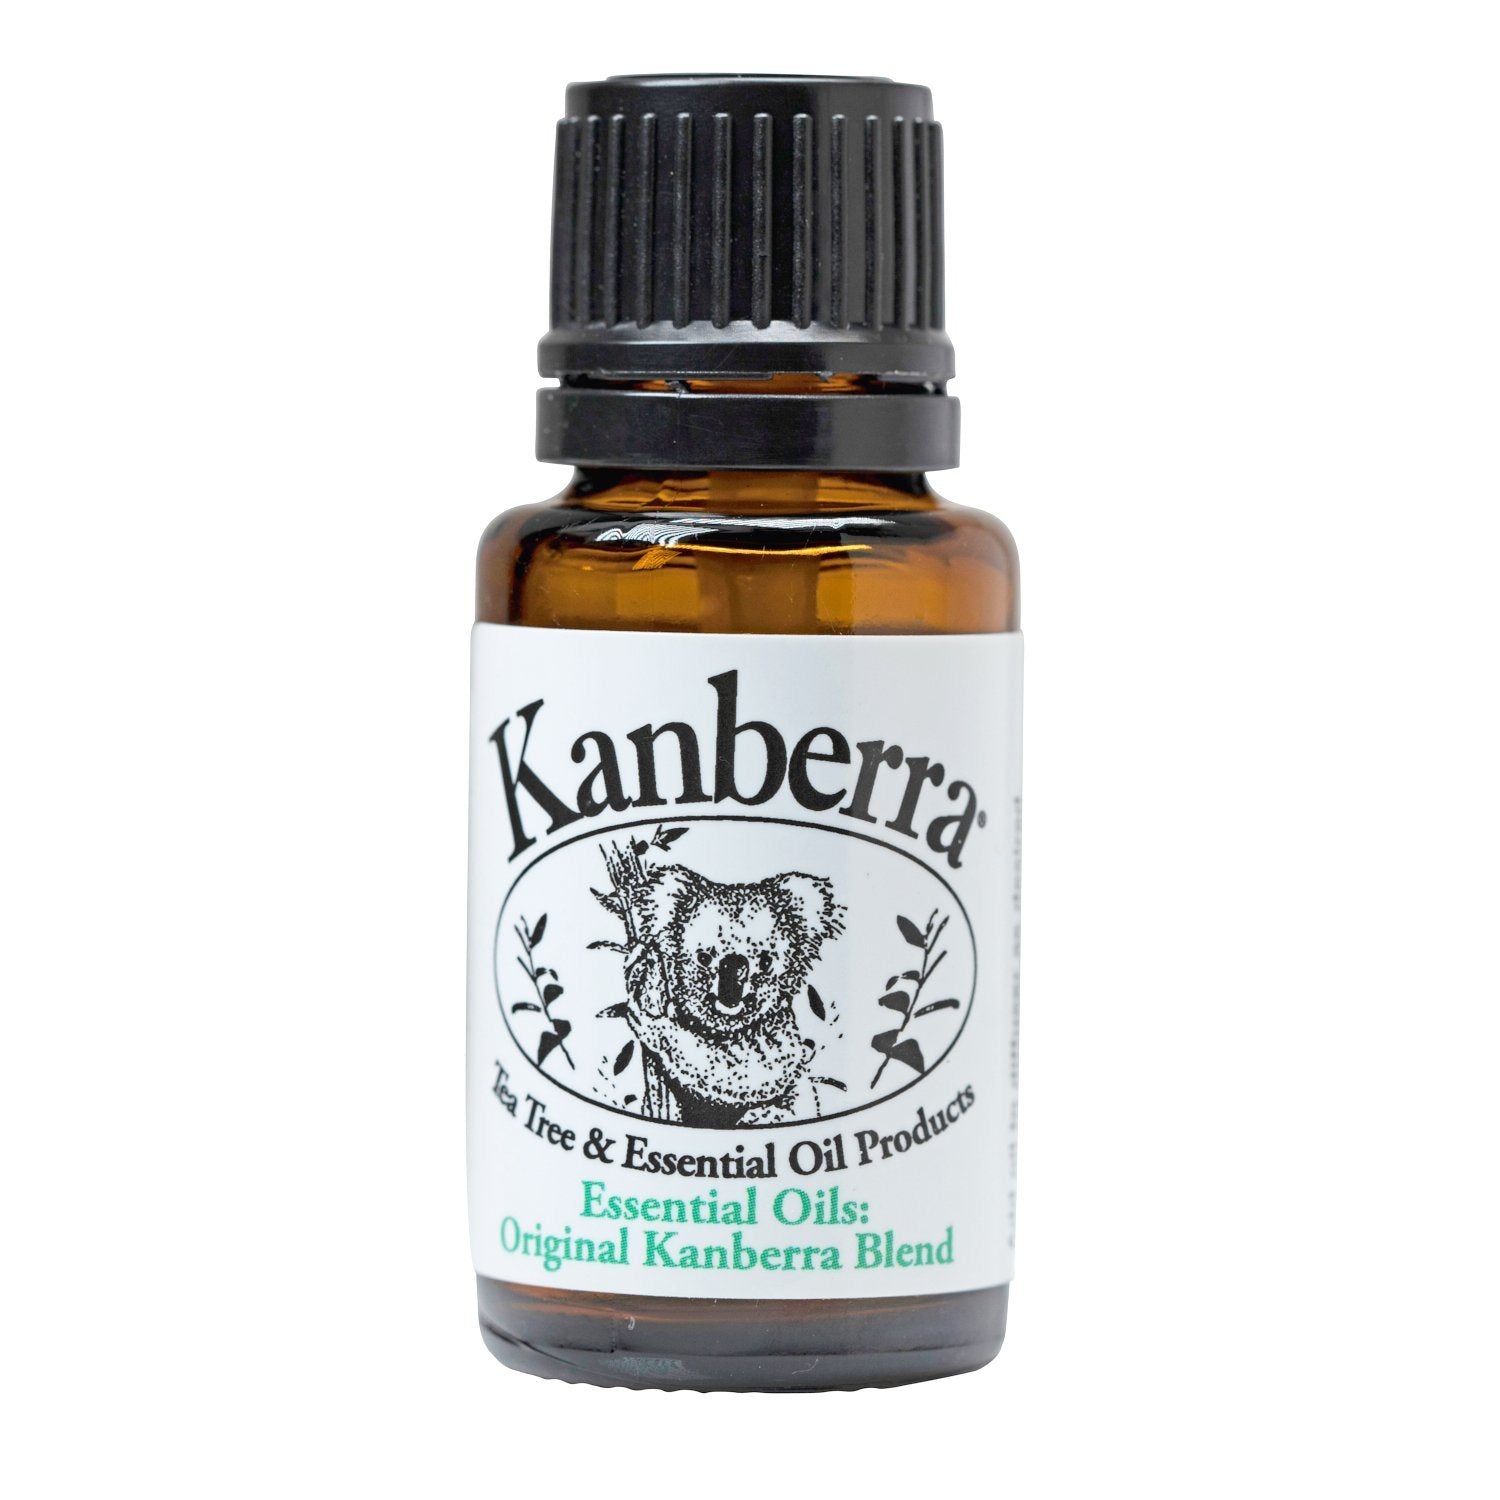 Kanberra Gel - Products and supplies for yatchs, superyatchs, shipyards and boats